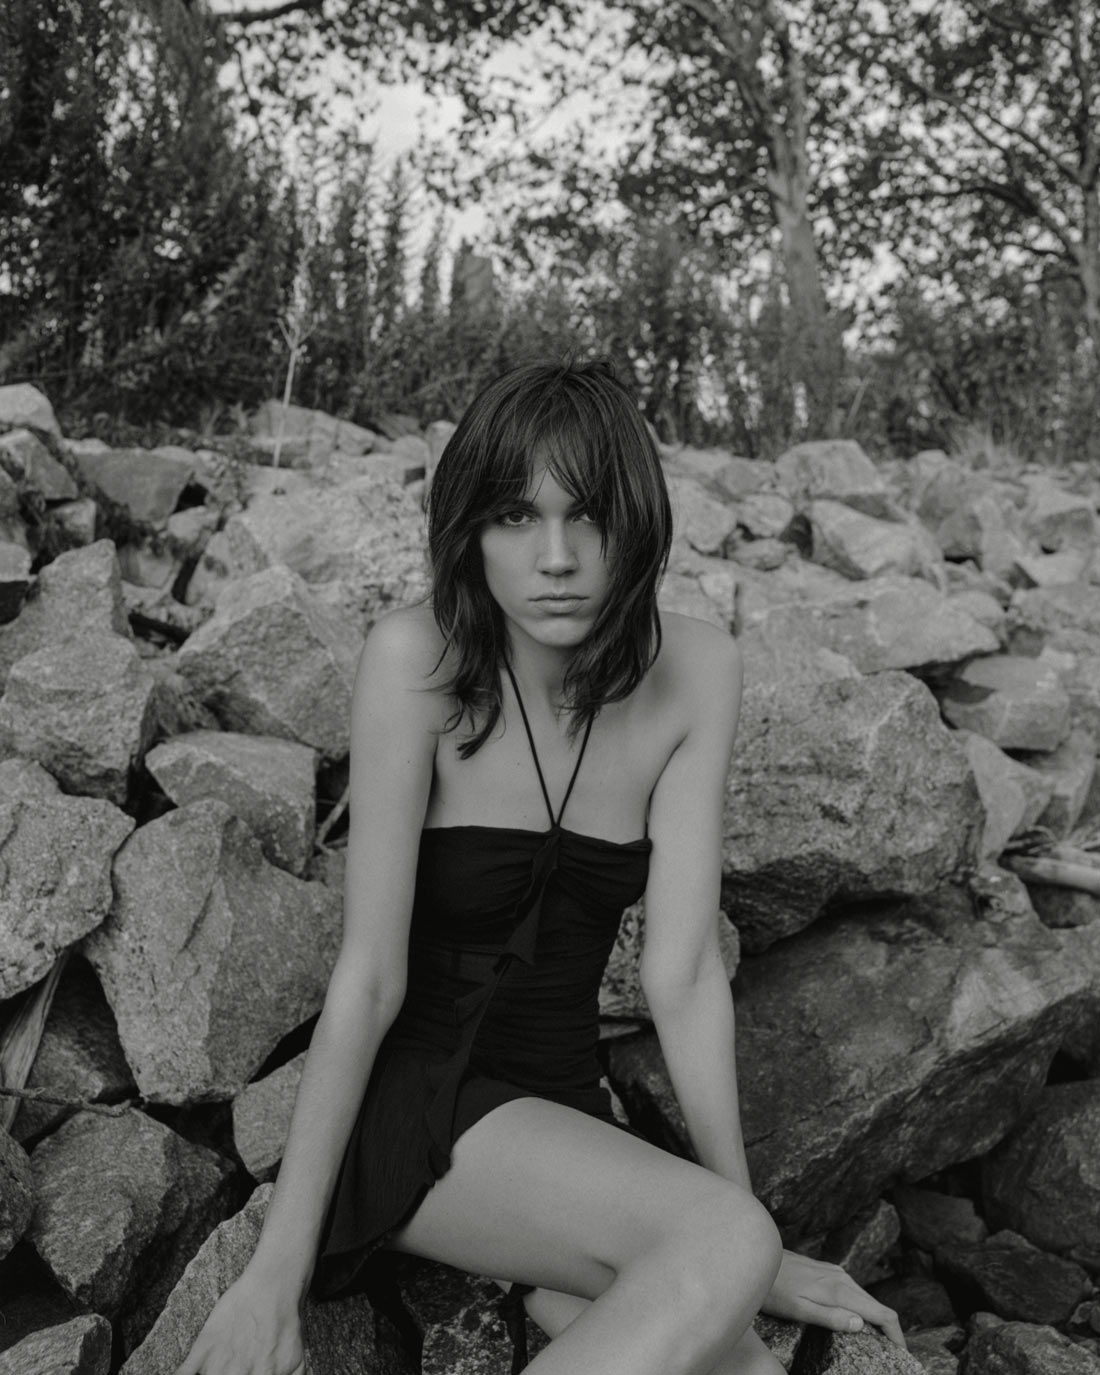 Female model Abby Blaine is sitting on rocks, trees in the background, she is wearing a Zara dress, her hair is down, she has bangs. Photographed by New York photographer Maria Bruun, photographed using a Mamiya RZ67 camera and Ilford black and white film.